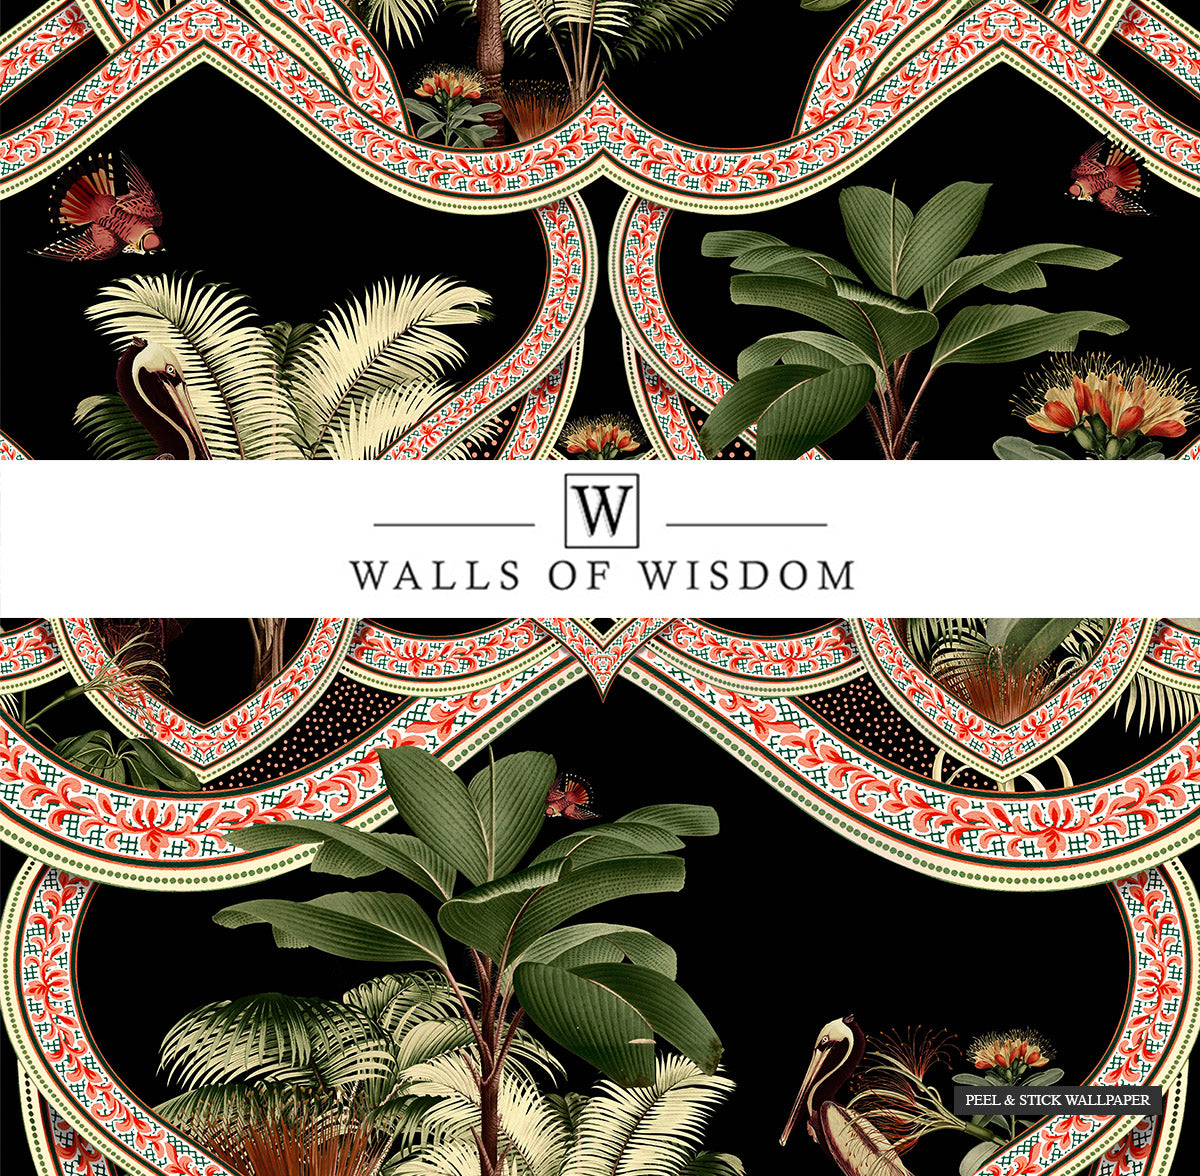 Elegant entryway accented with Tropical Floral Maximalist Peel and Stick Wallpaper in art deco style."